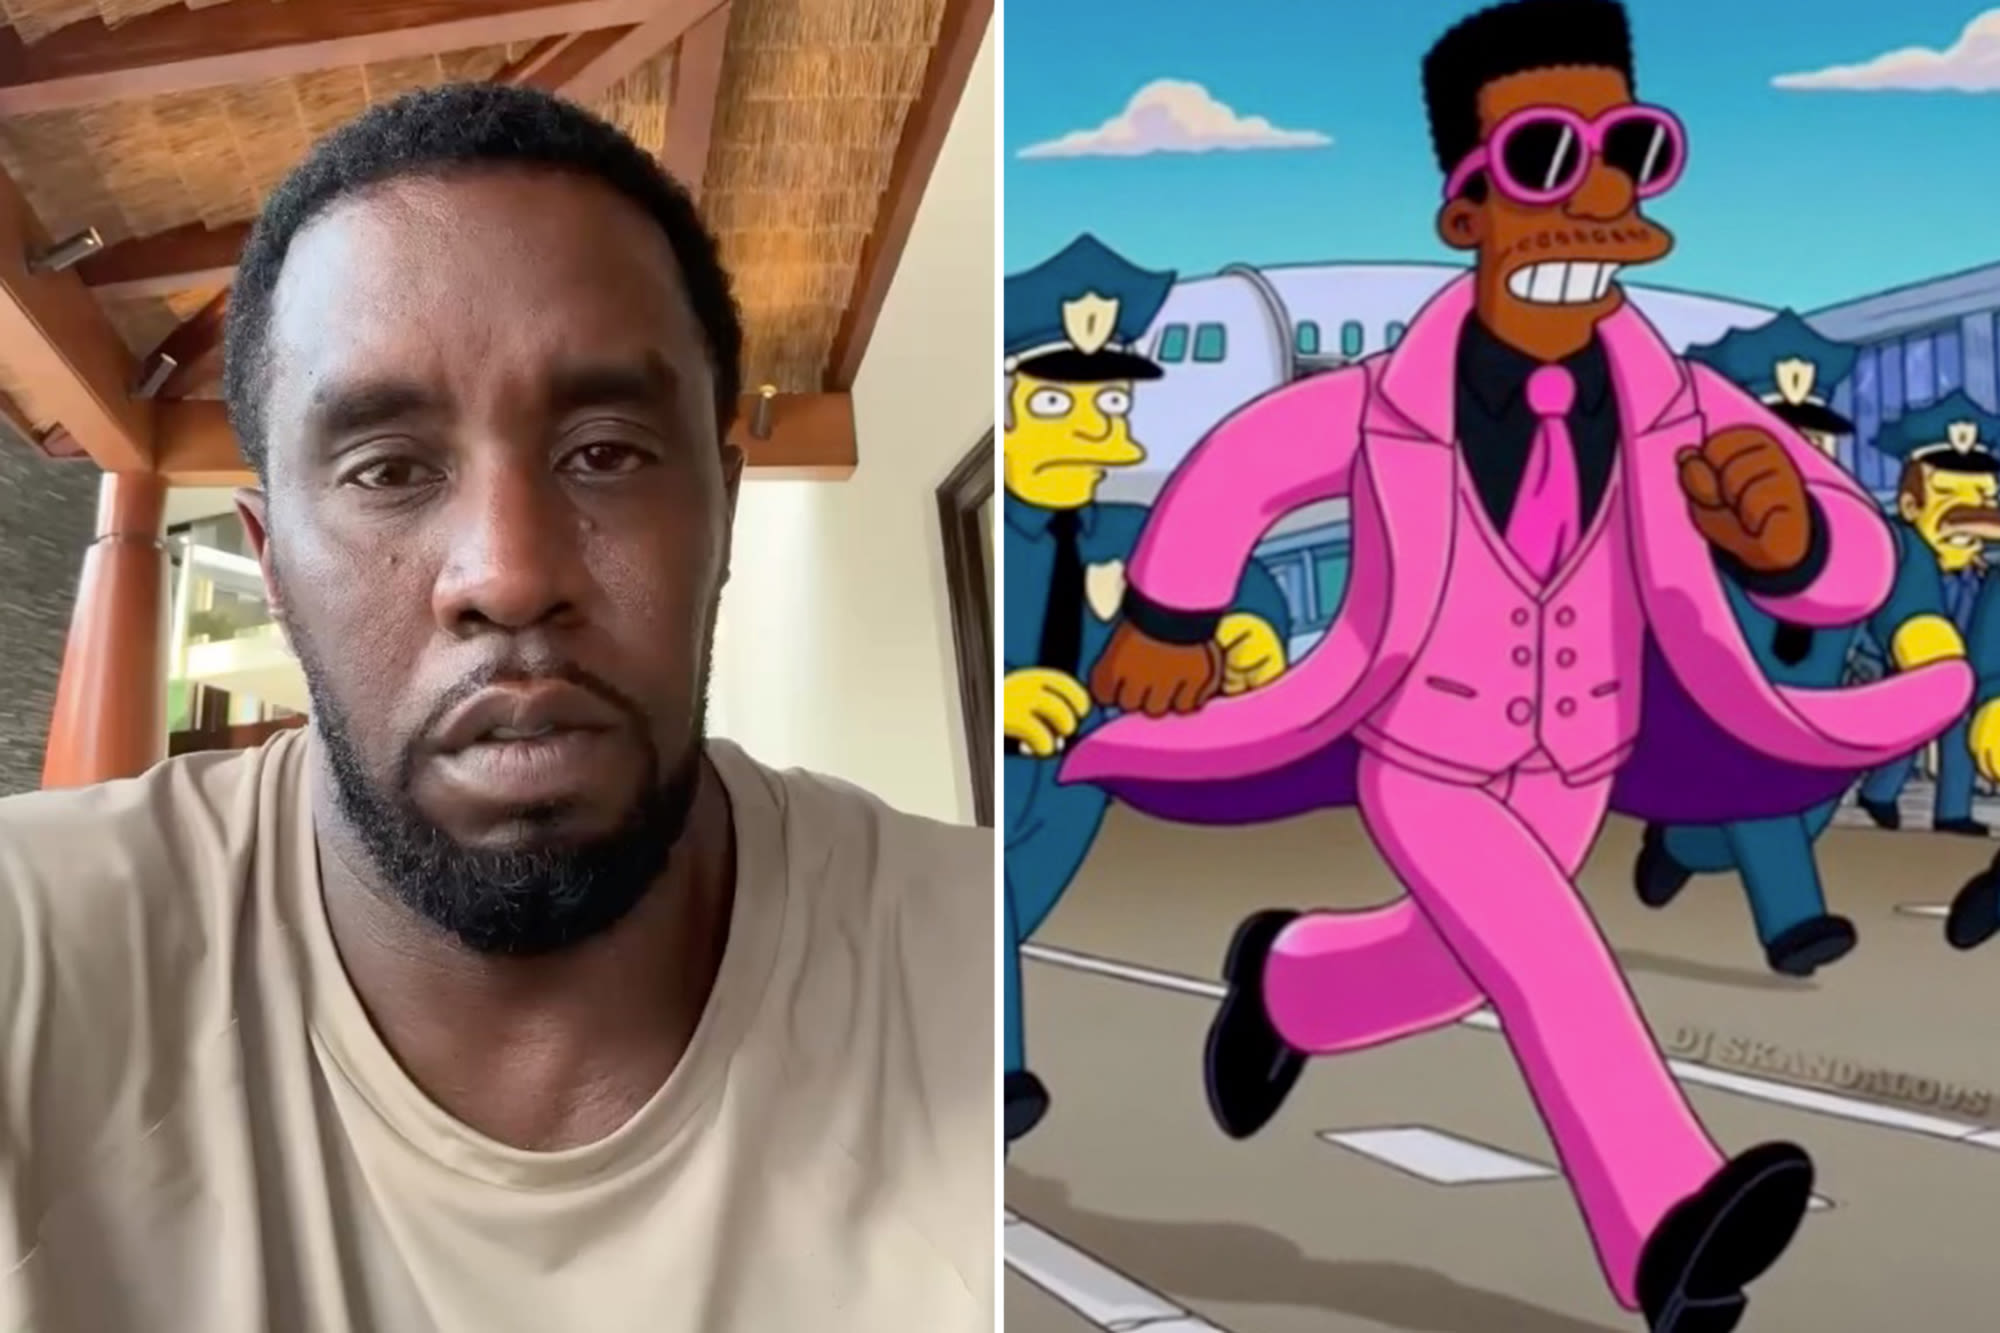 ‘The Simpsons’ showrunner slams fake image that ‘predicted’ Diddy’s downfall: ‘Digital misinformation’